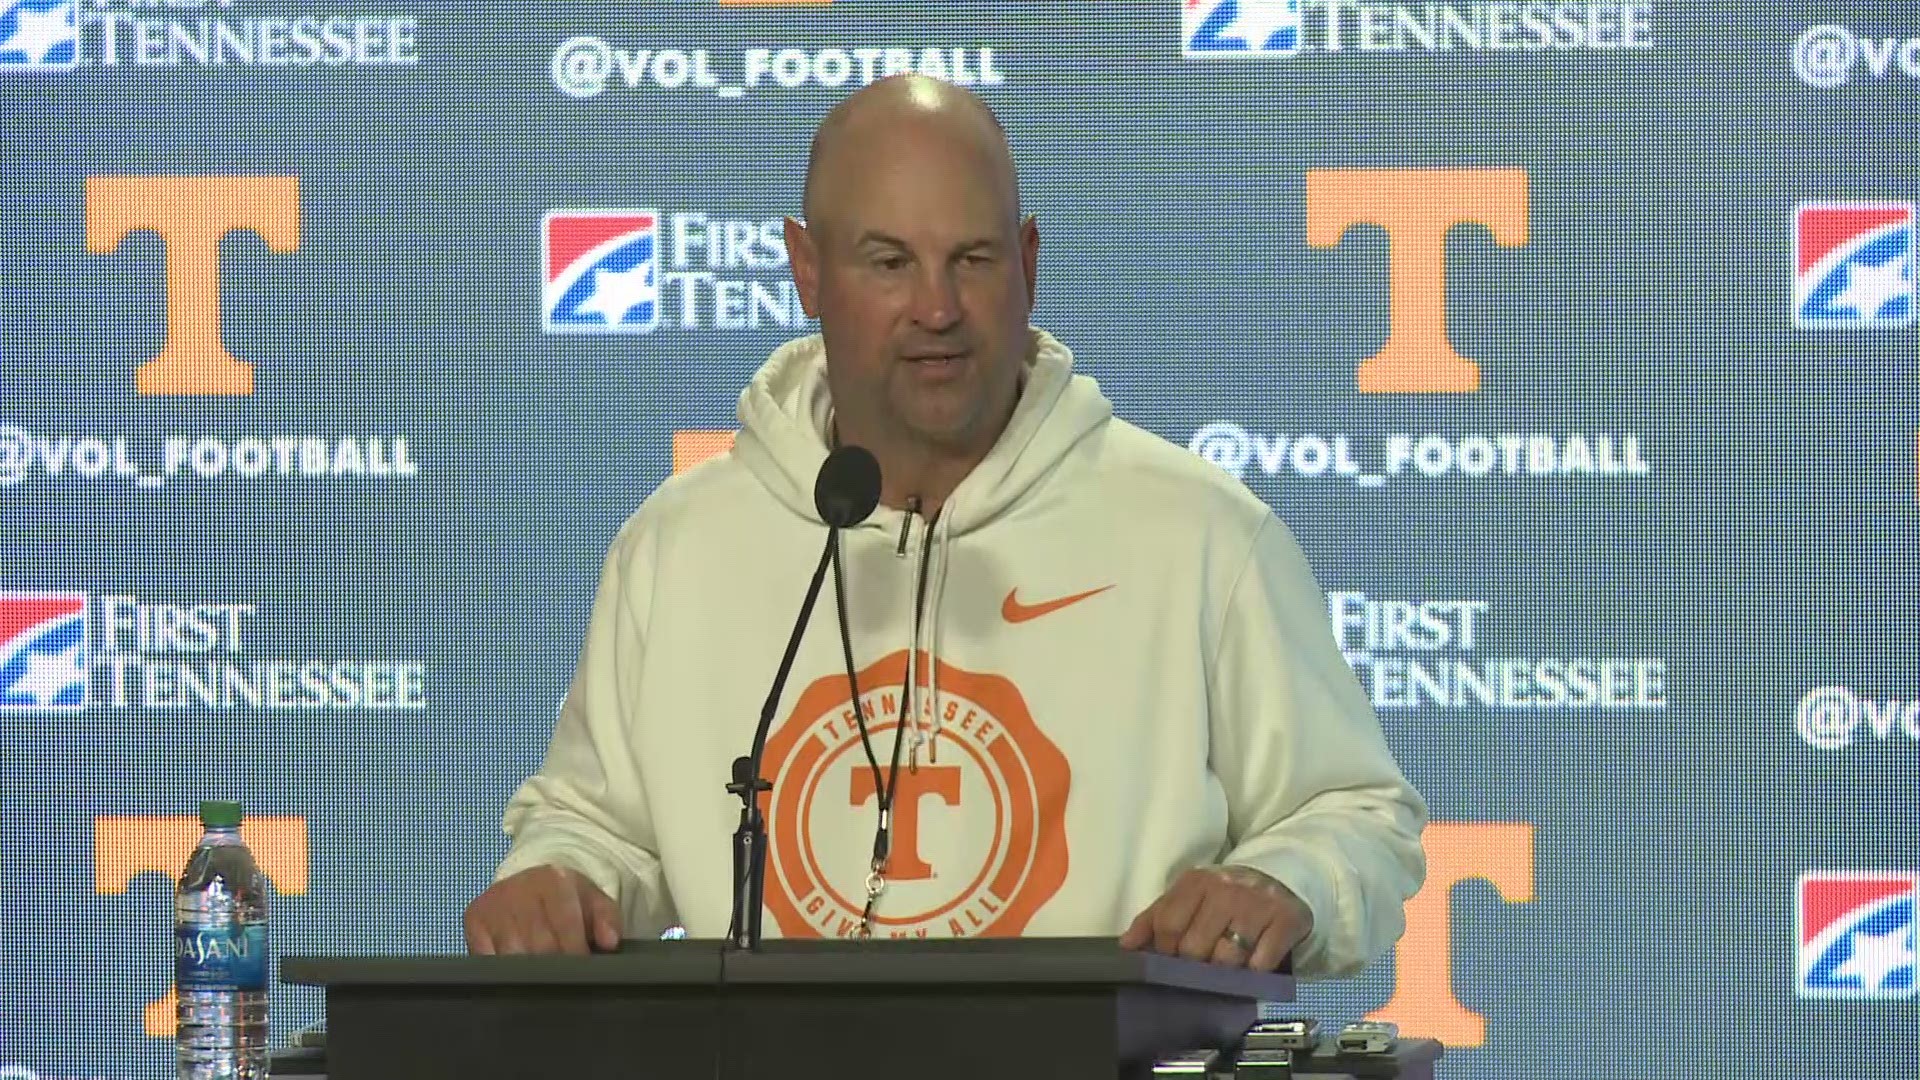 Tennessee Vols head coach Jeremy Pruitt talks about Bryce Thompson's return to practice and the team's preparation for Saturday's game against Chattanooga.